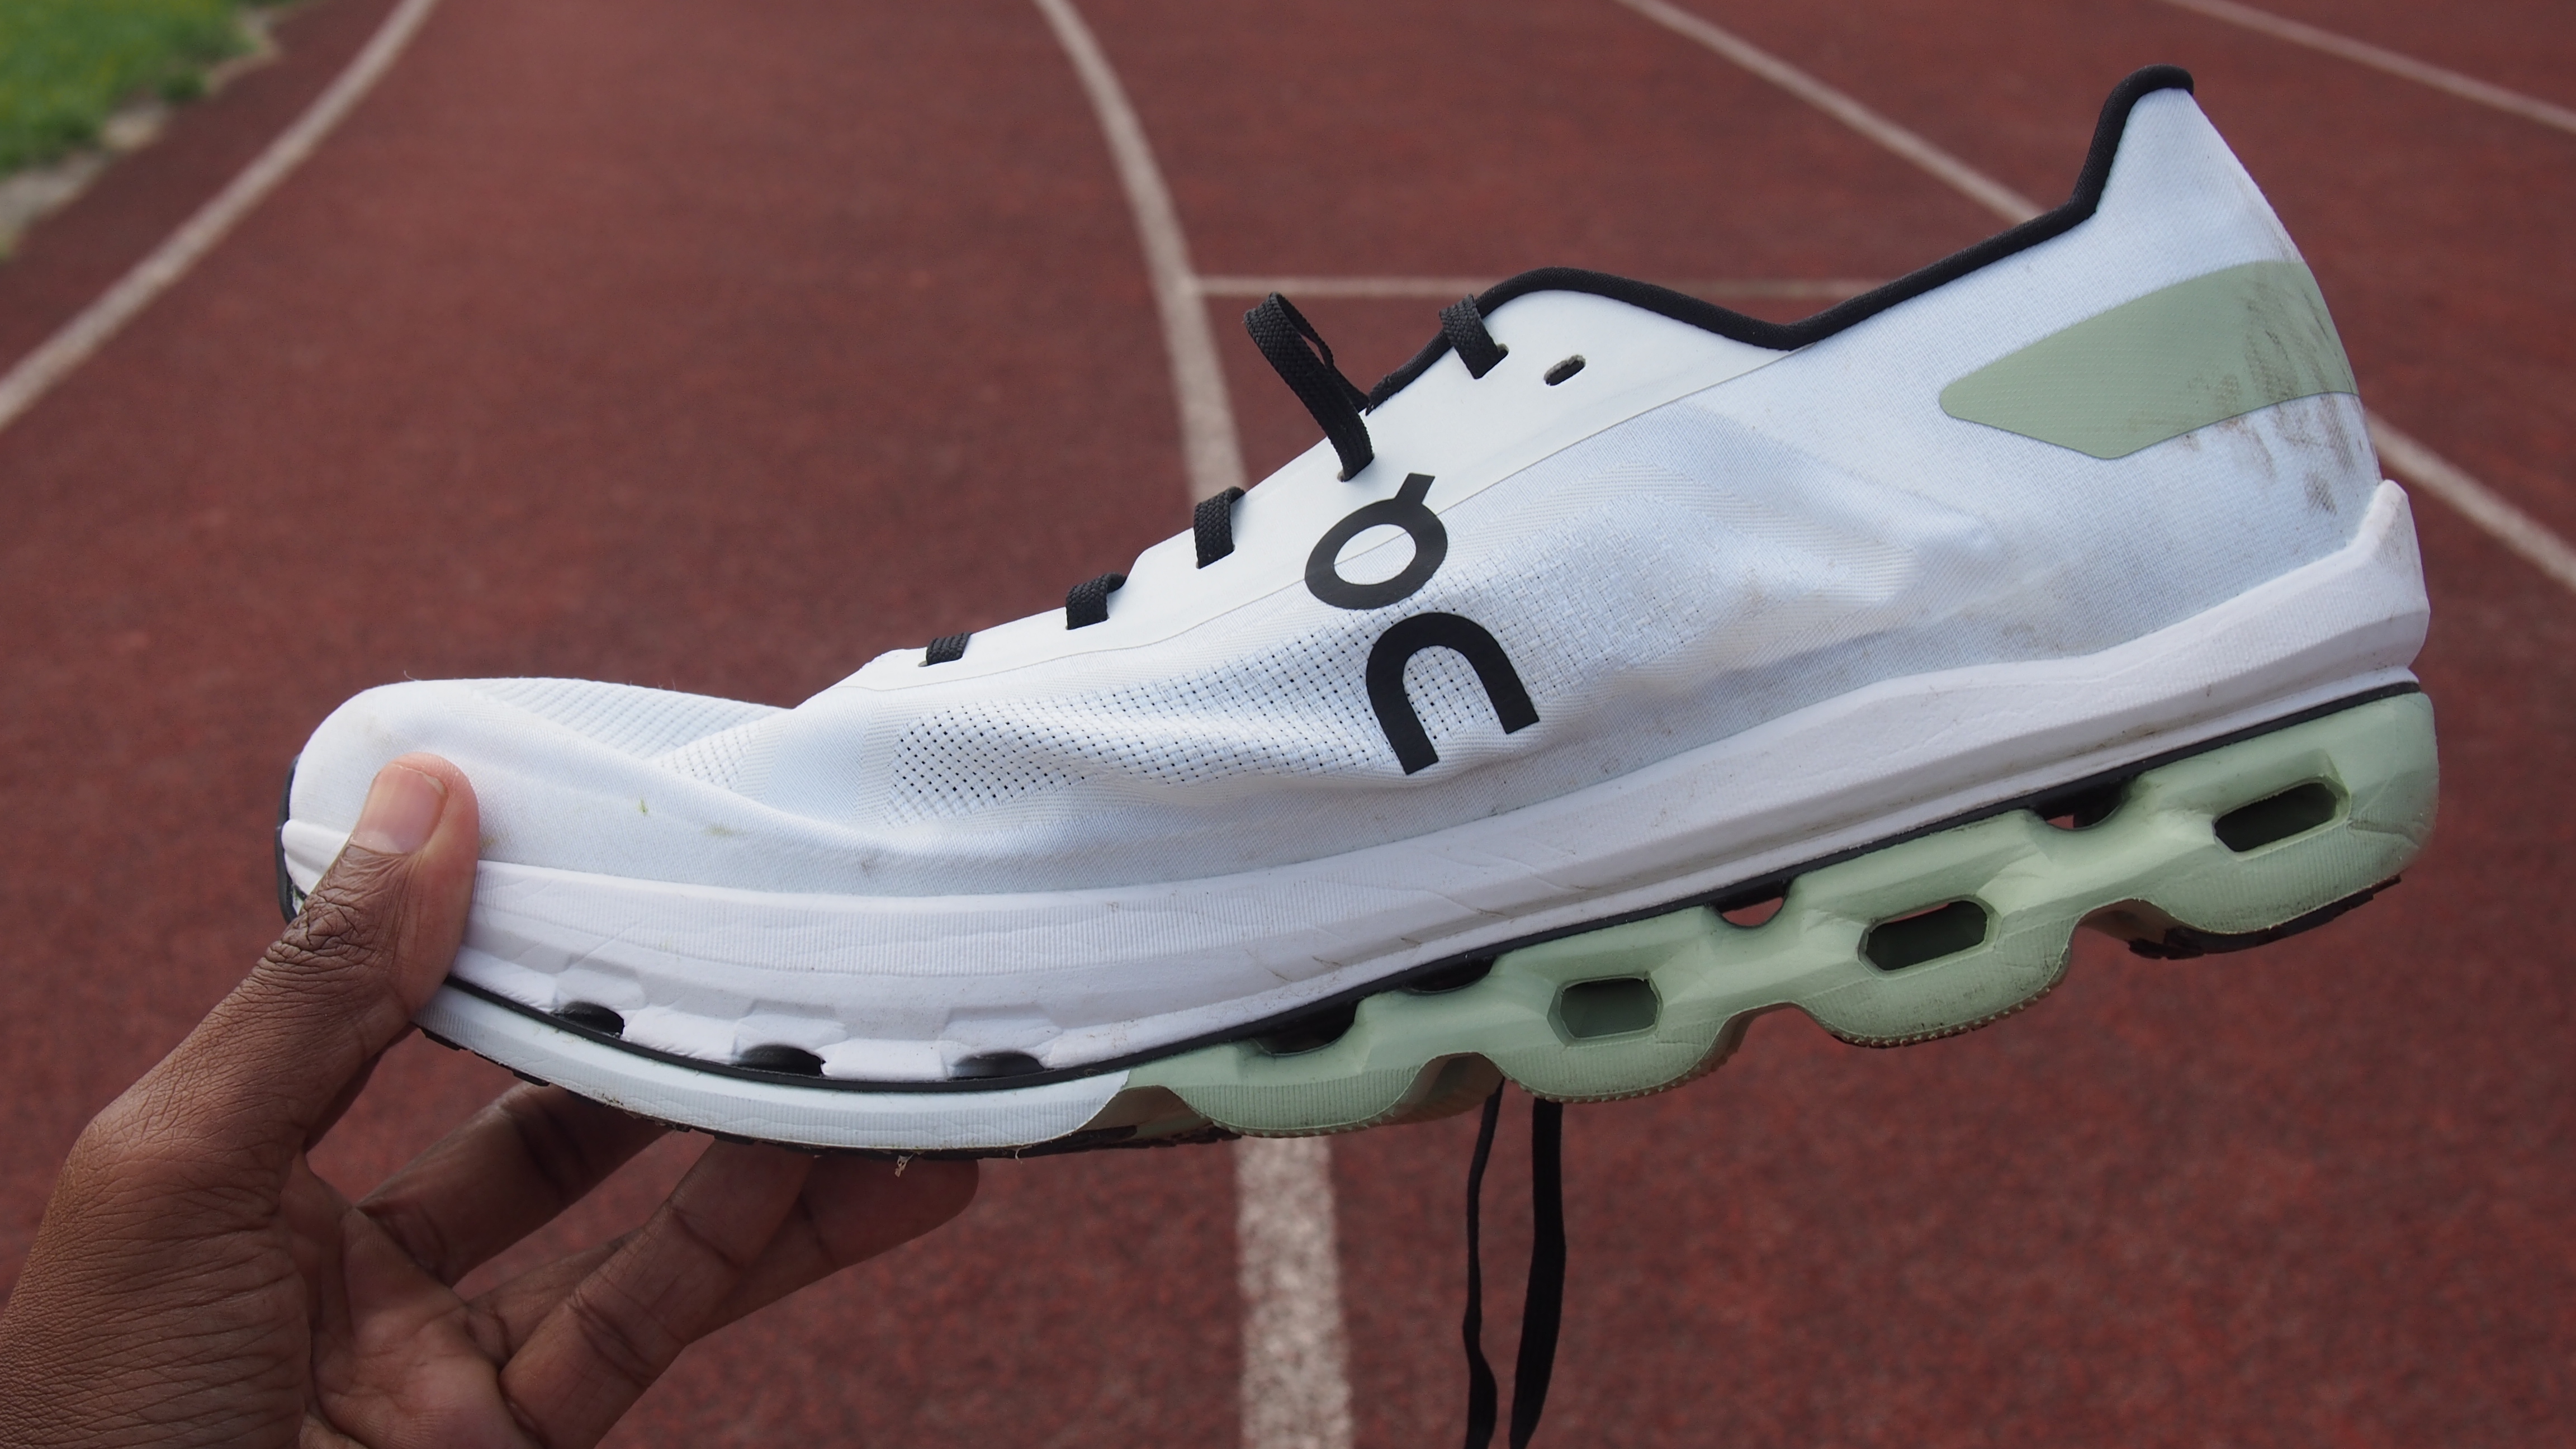 Man's hand holding a On Cloudboom Echo running shoe, showing the side profile